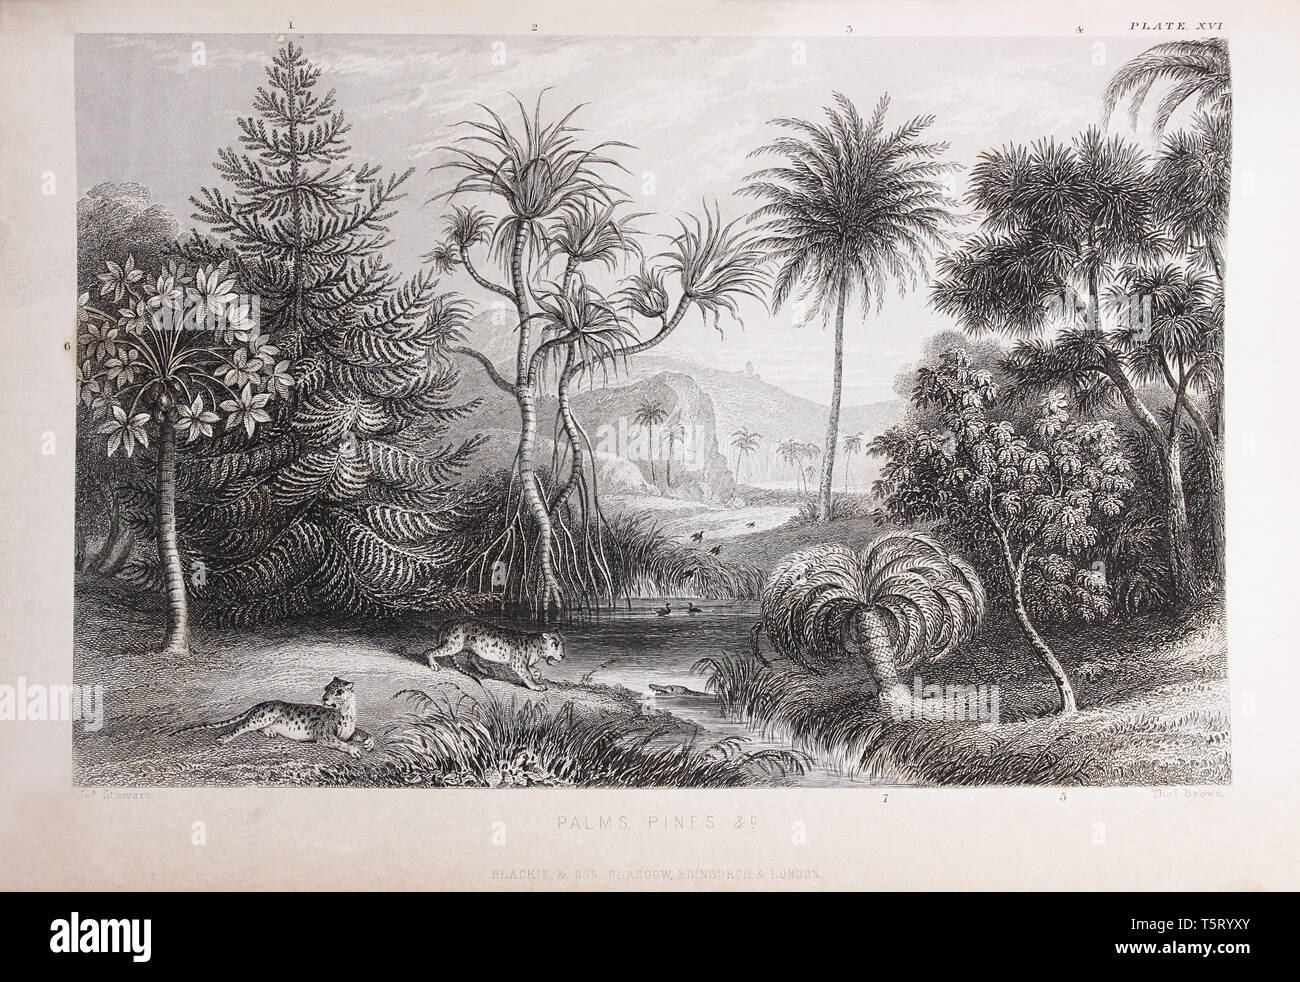 Plate titled 'Palms pines etc.', from William Rhind's 'The Vegetable Kingdom', 1860 Stock Photo